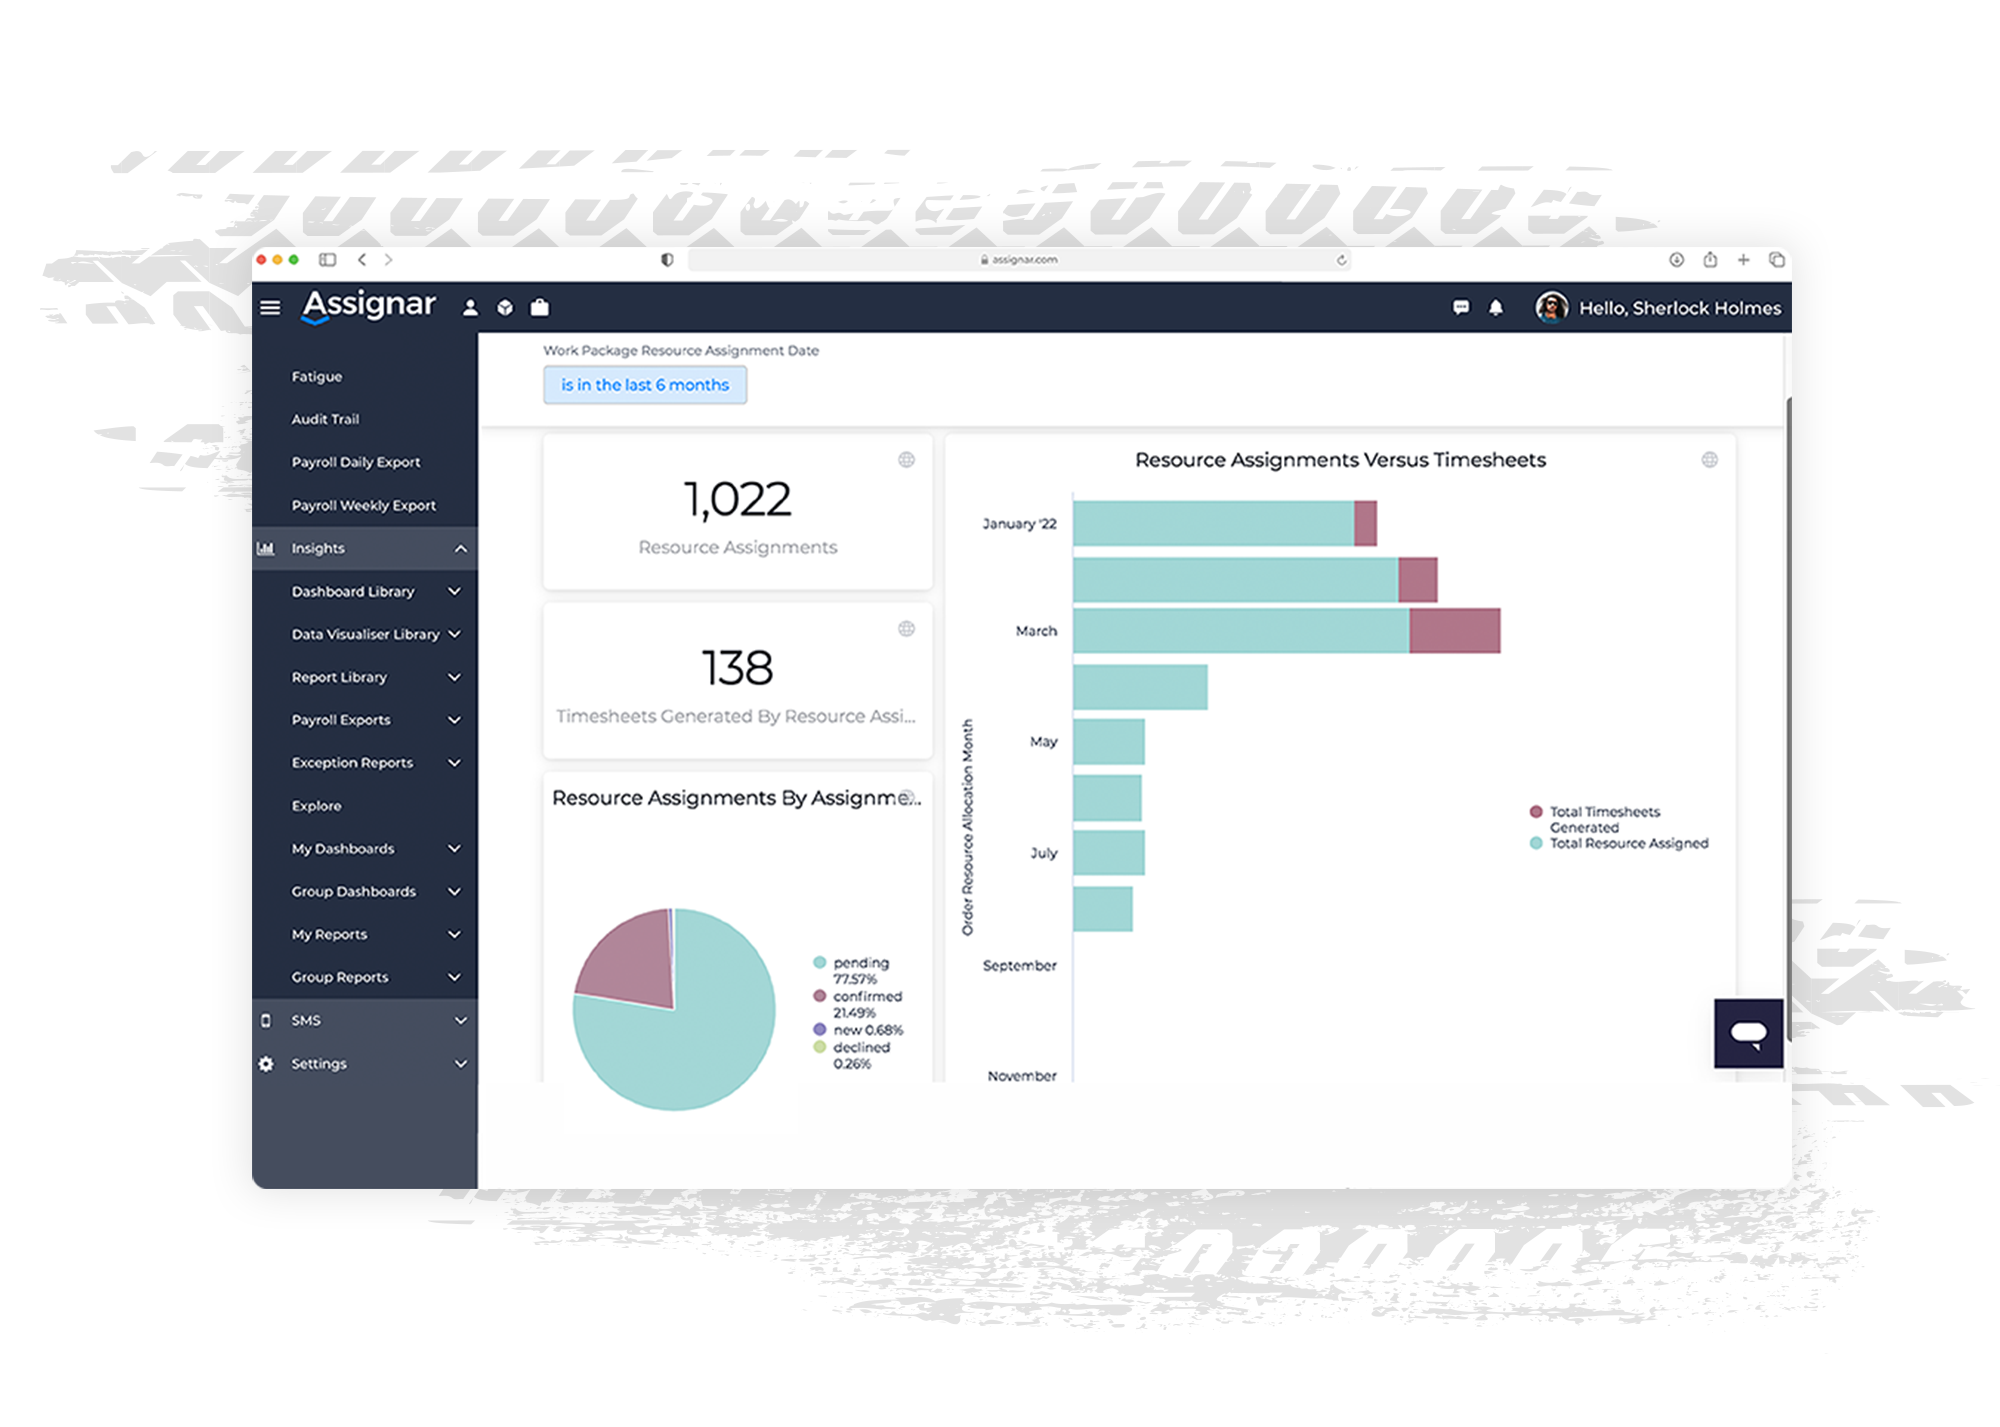 Easily get a snapshot of your operations with Dashboards